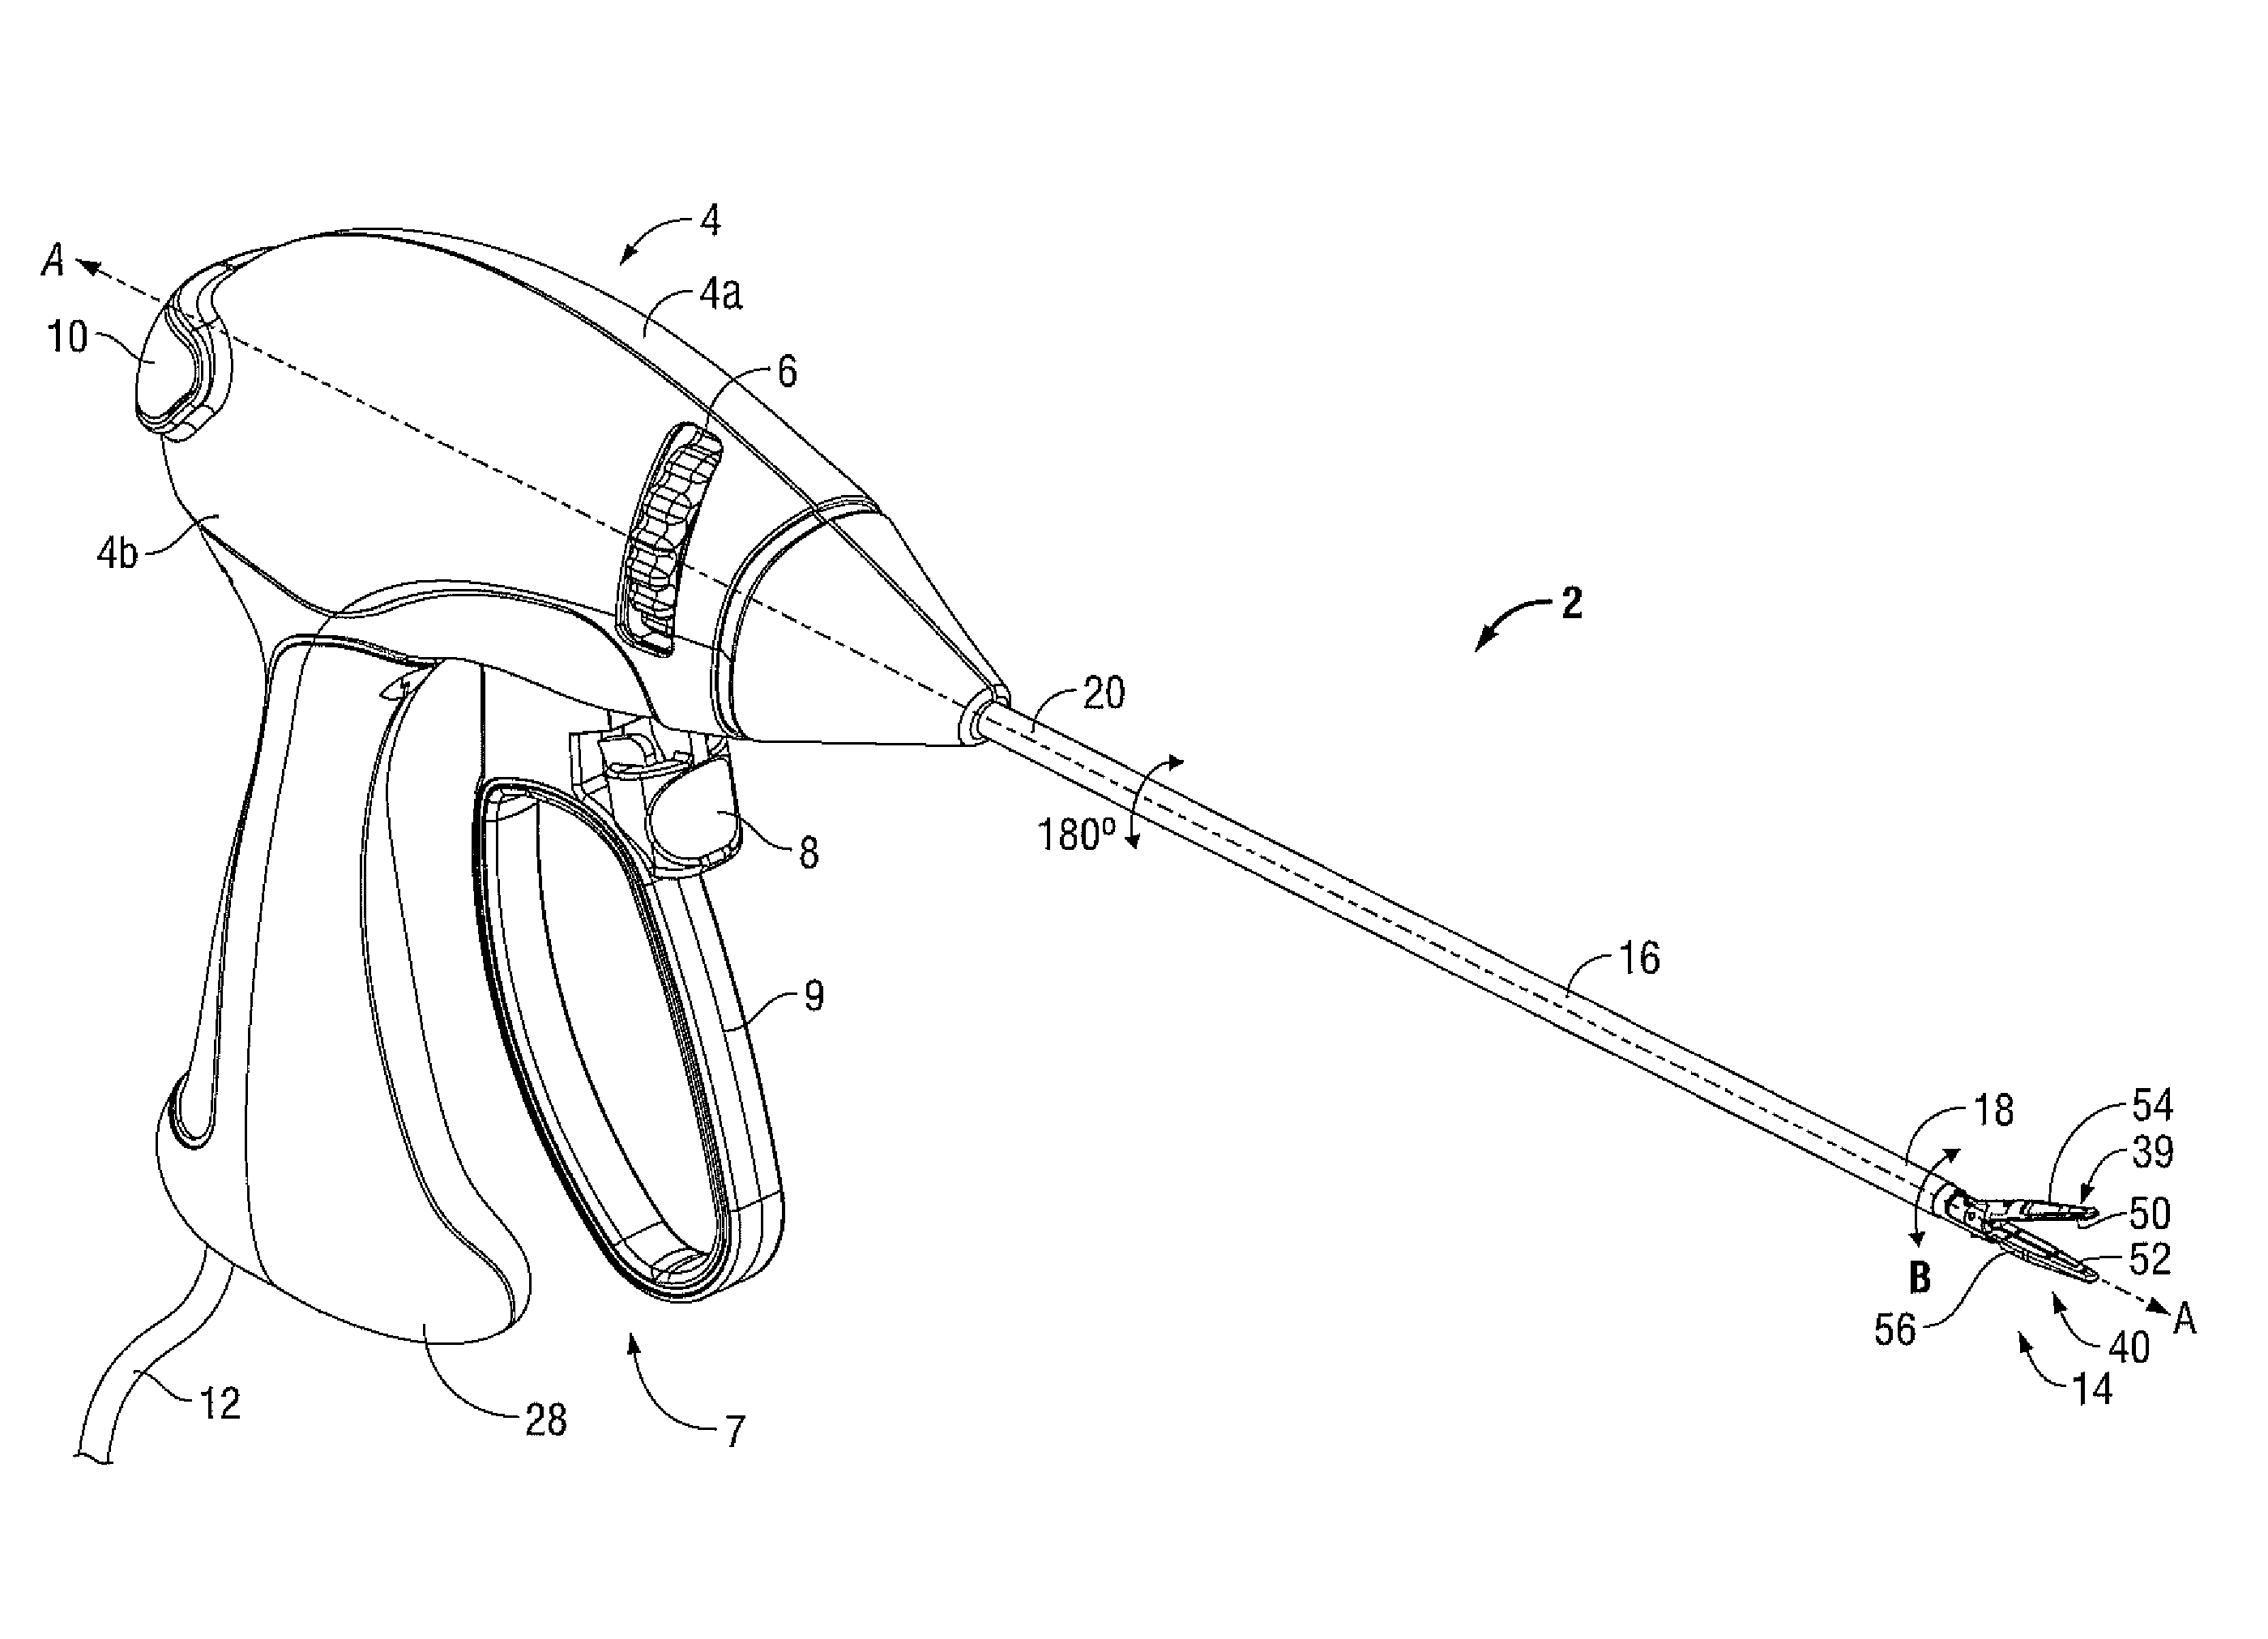 Apparatus for Performing an Electrosurgical Procedure